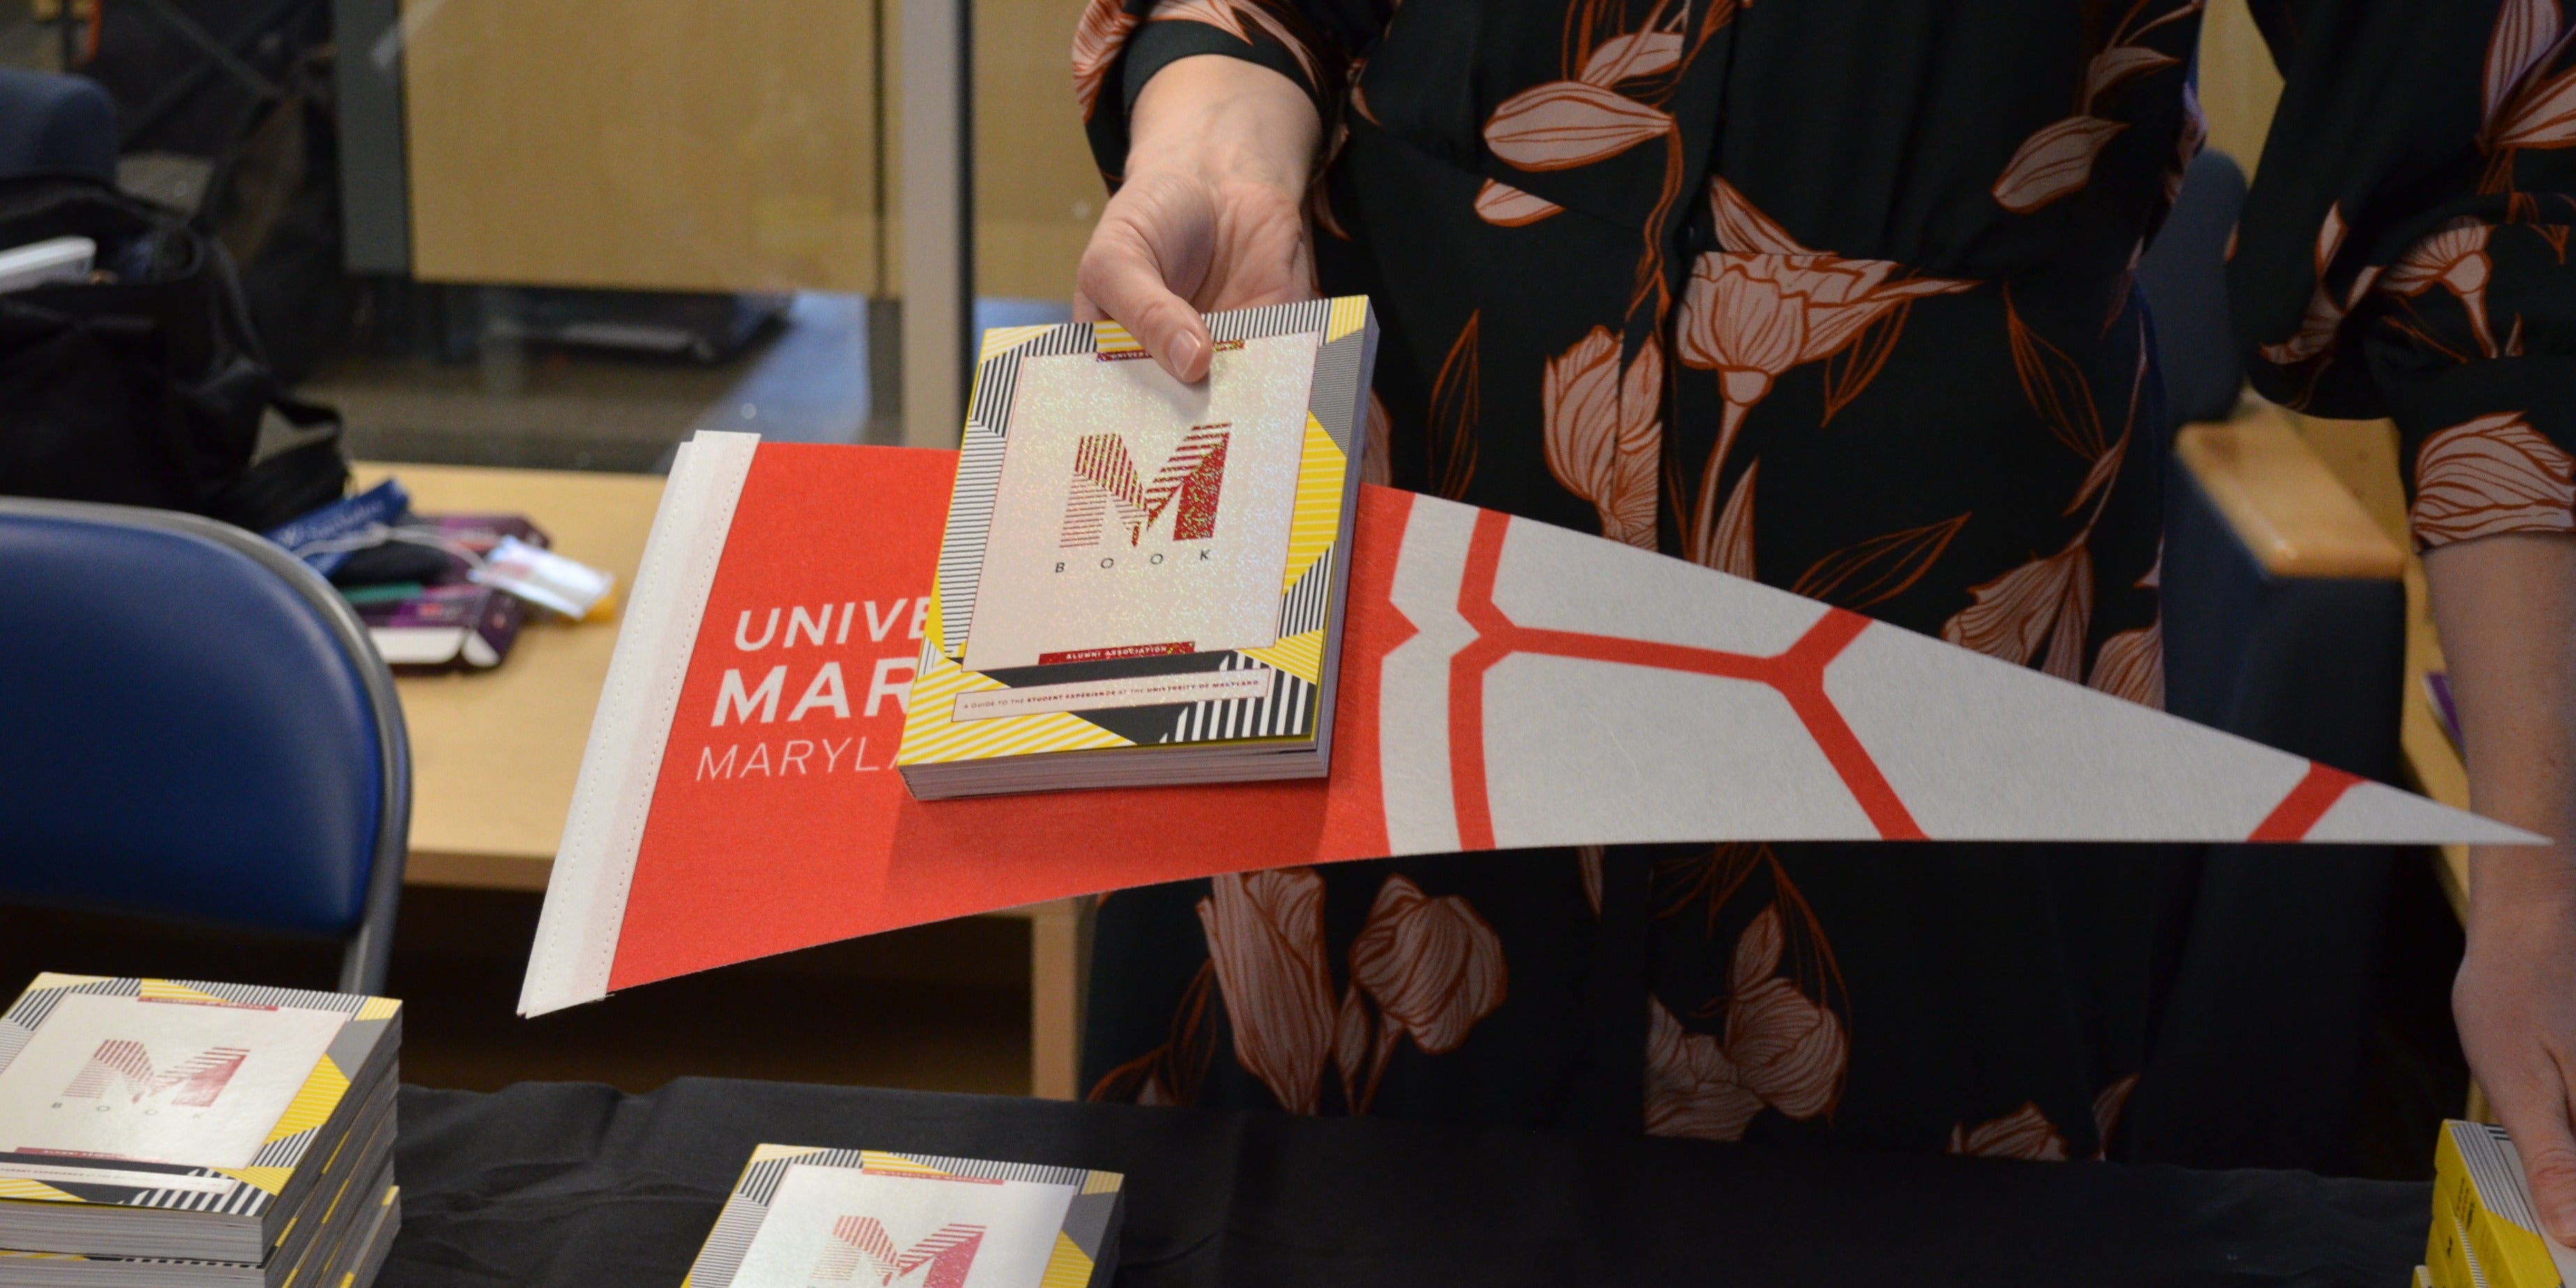 Carly Jimeson hands over a Maryland flag and book.